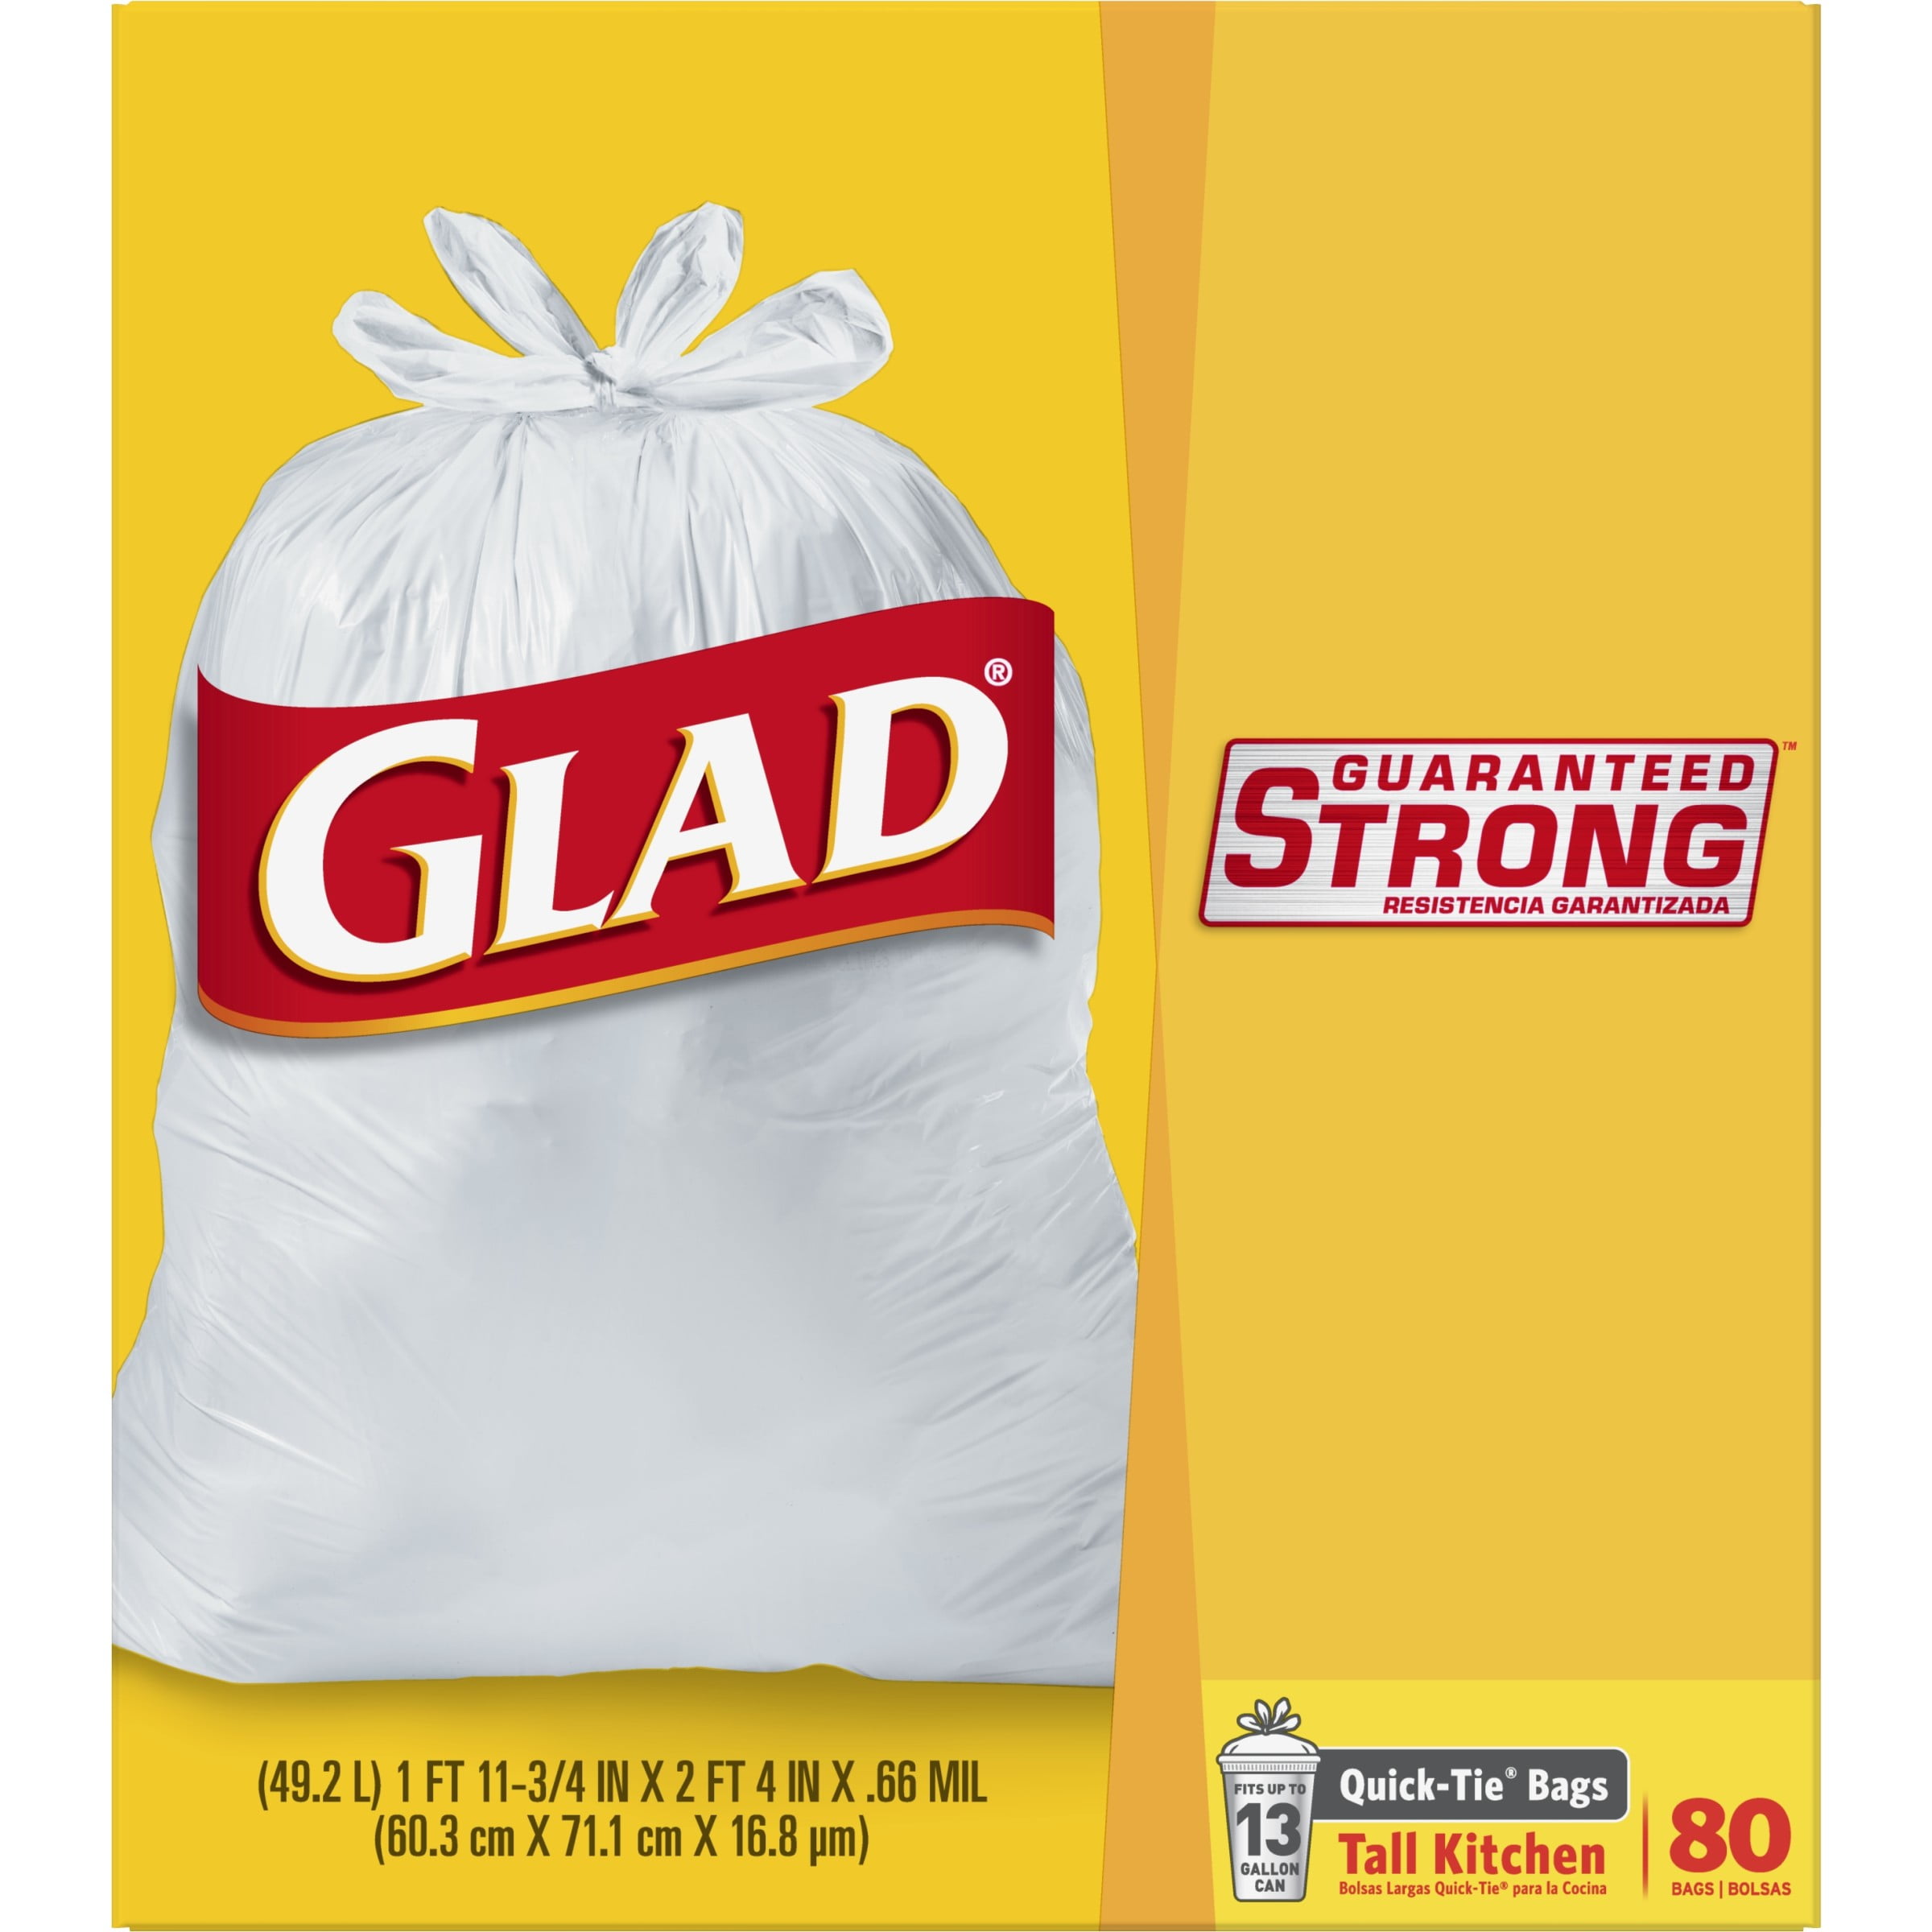 Save on Glad Quick-Tie Tall Kitchen Bags 13 Gallon Value Pack